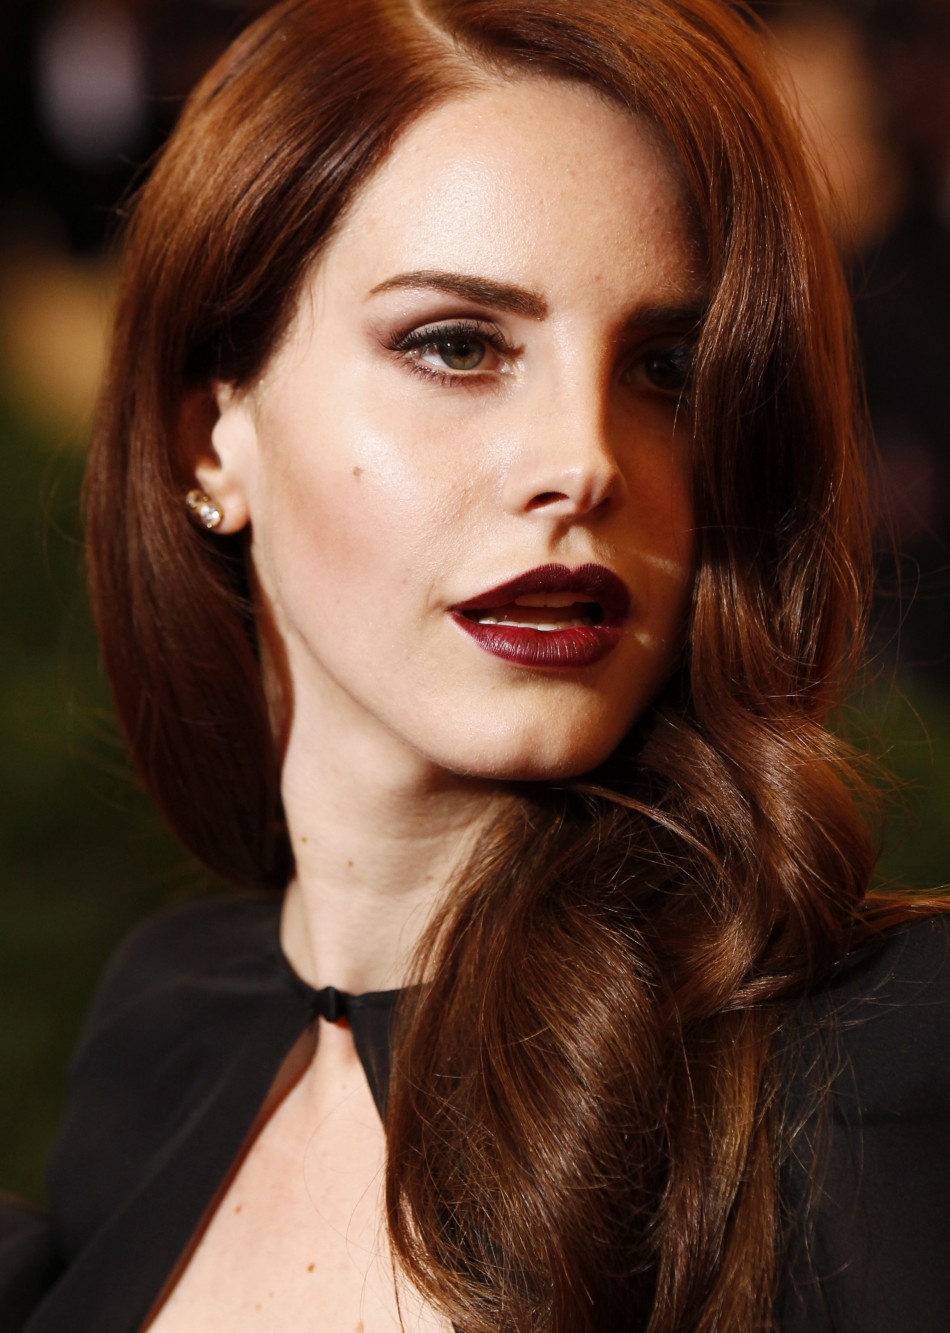 Lana Del Rey: 'I Have Slept with Lots of Guys in the Industry'